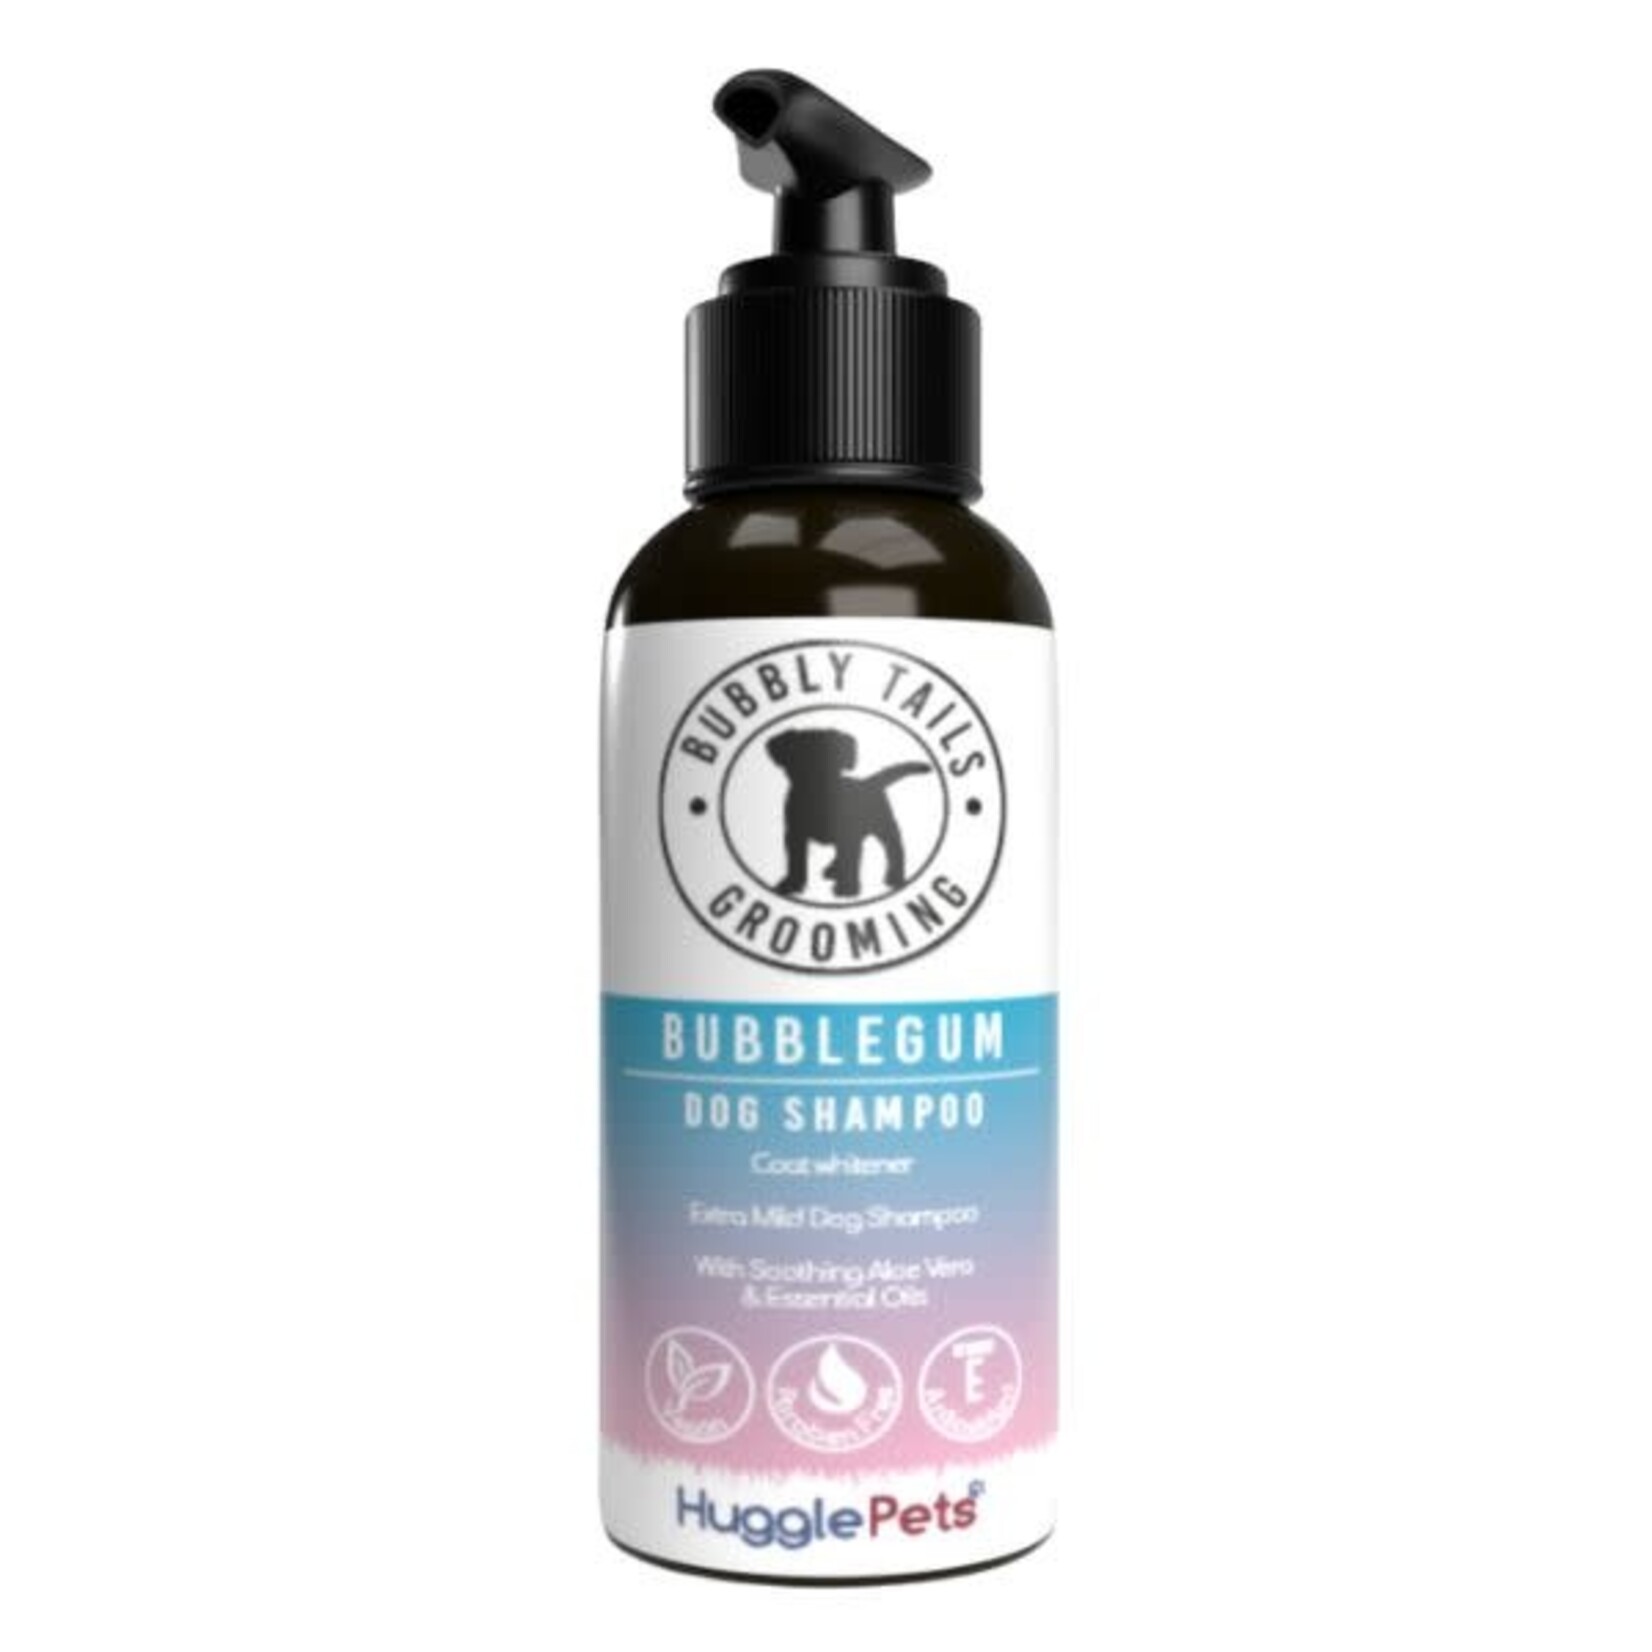 HugglePets Bubbly Tails 2-in-1 Dog Shampoo & Conditioner, 500ml